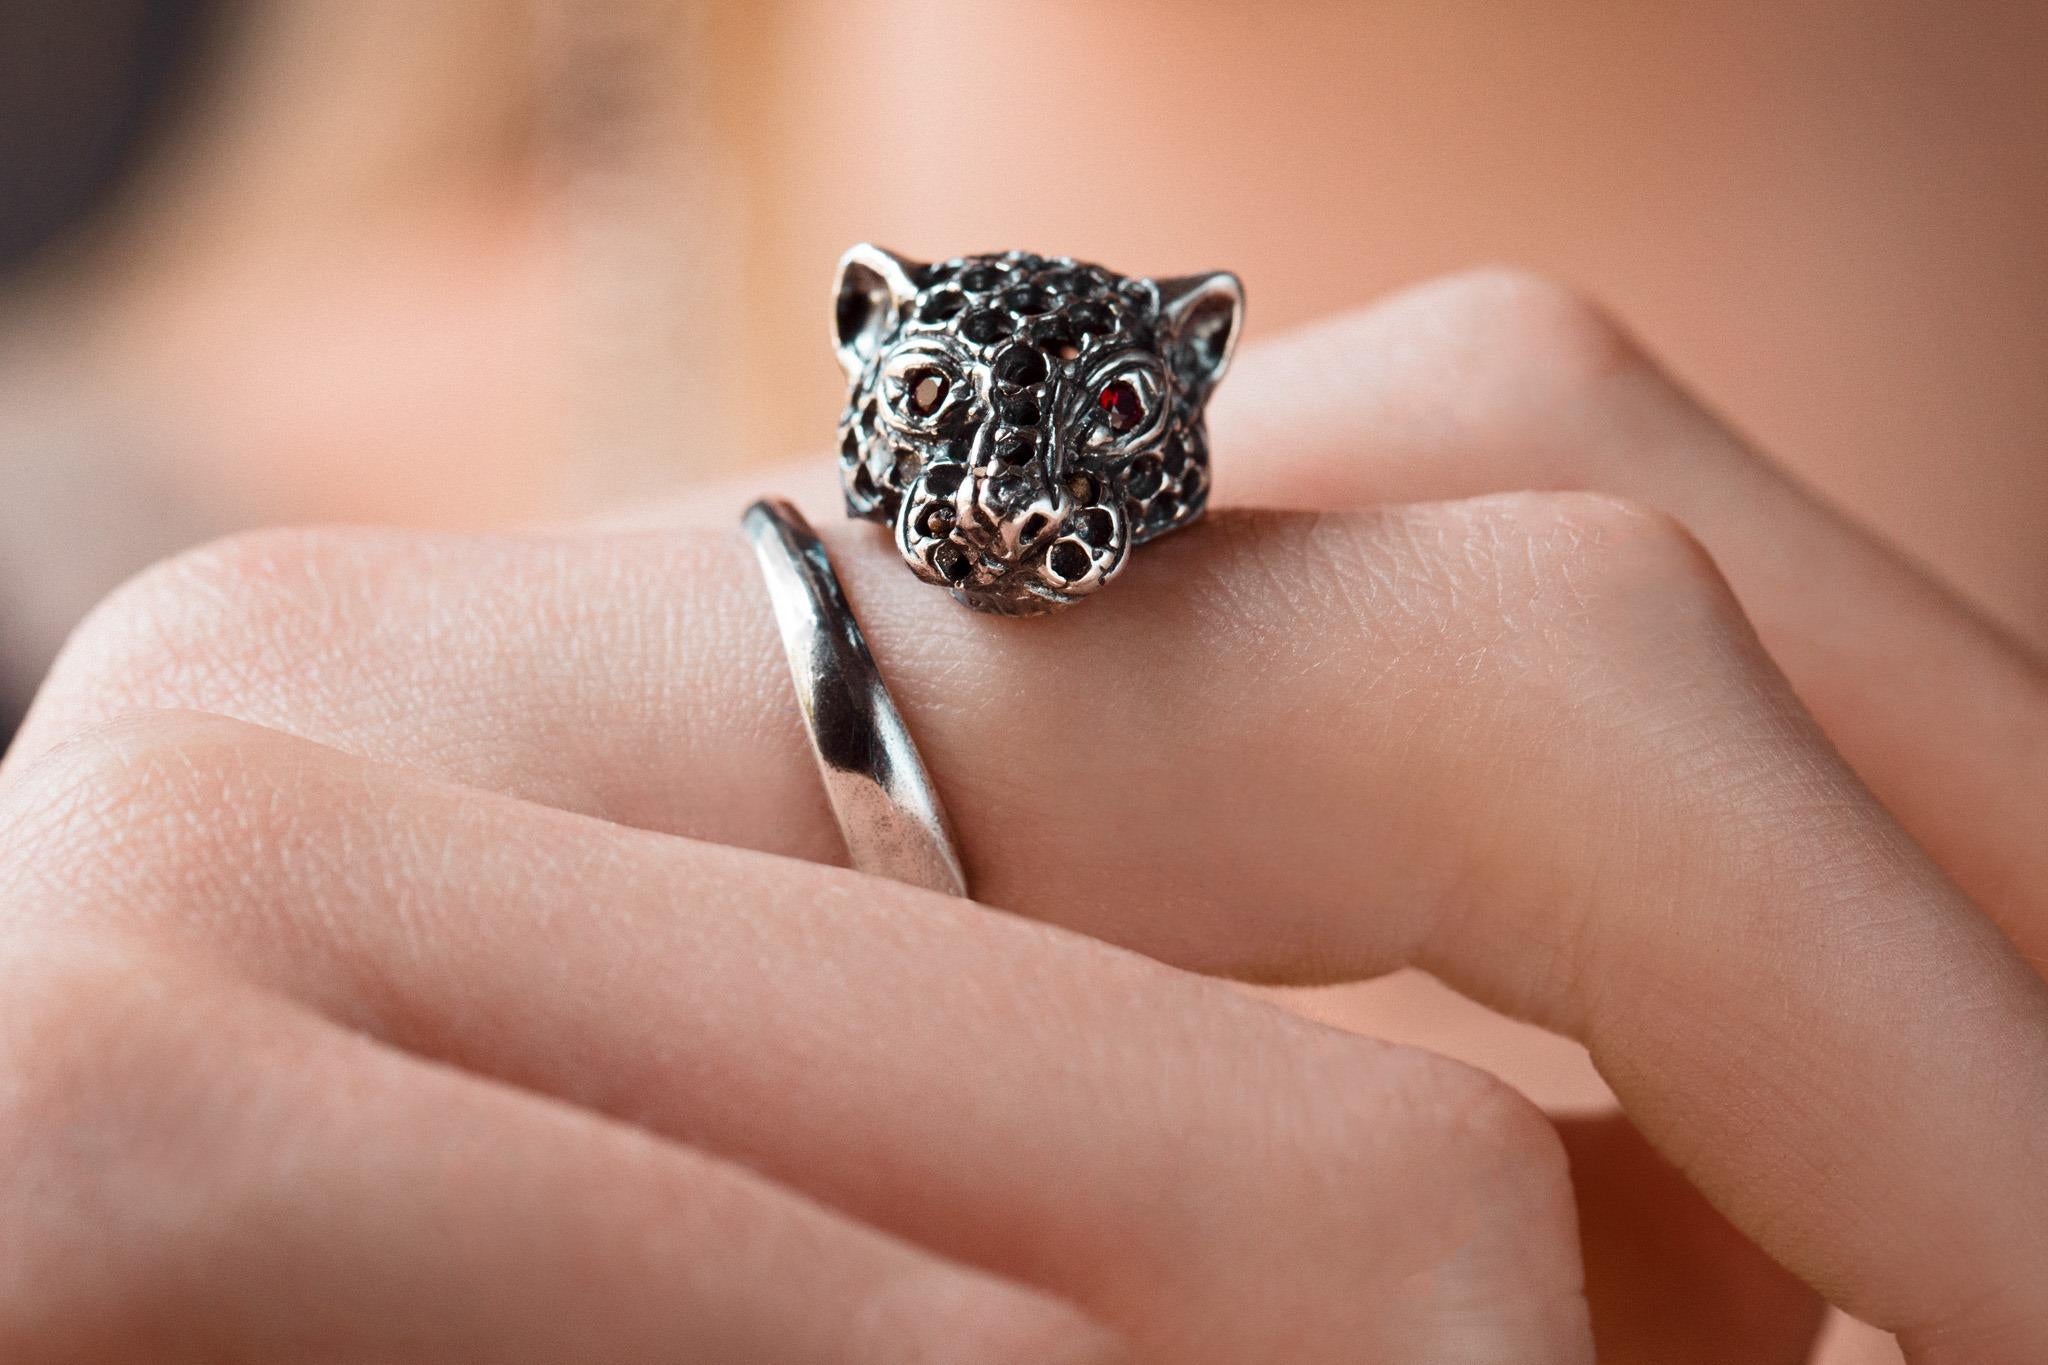 The quintessential icon of Iosselliani, the Panther's head refresh the idea of the engagement ring with its intriguing animal-inspired look. Hand crafted in antique silver, the ring is encrusted with red zircon as the panther's eyes. Wear it by